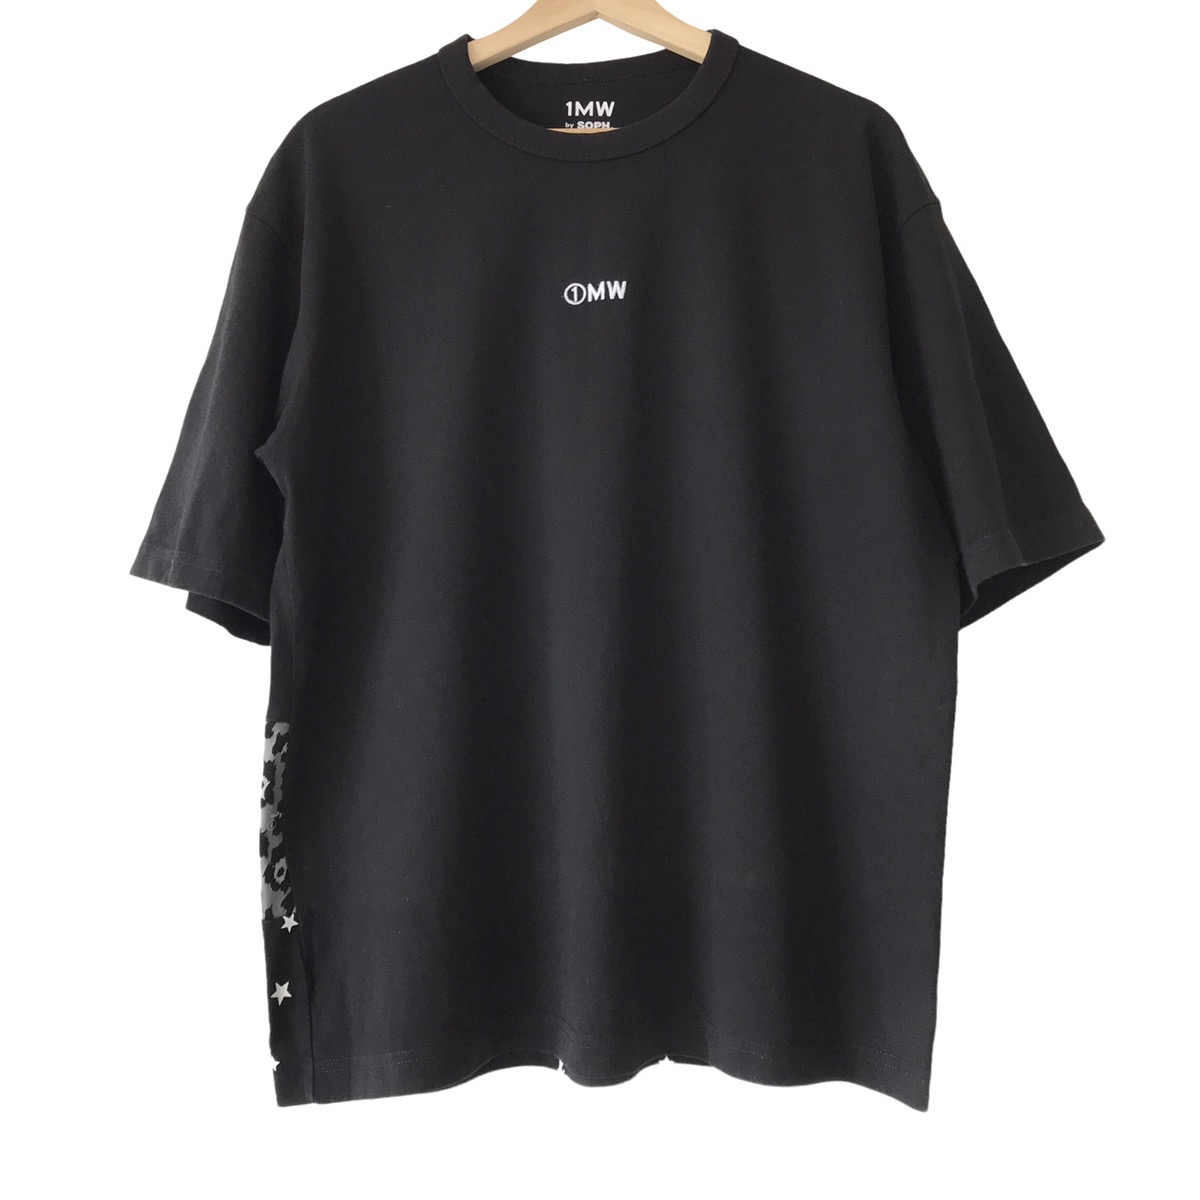 Authentic 1MW By Sophnet. X GU Japan Oversize Patterns Tee - 1